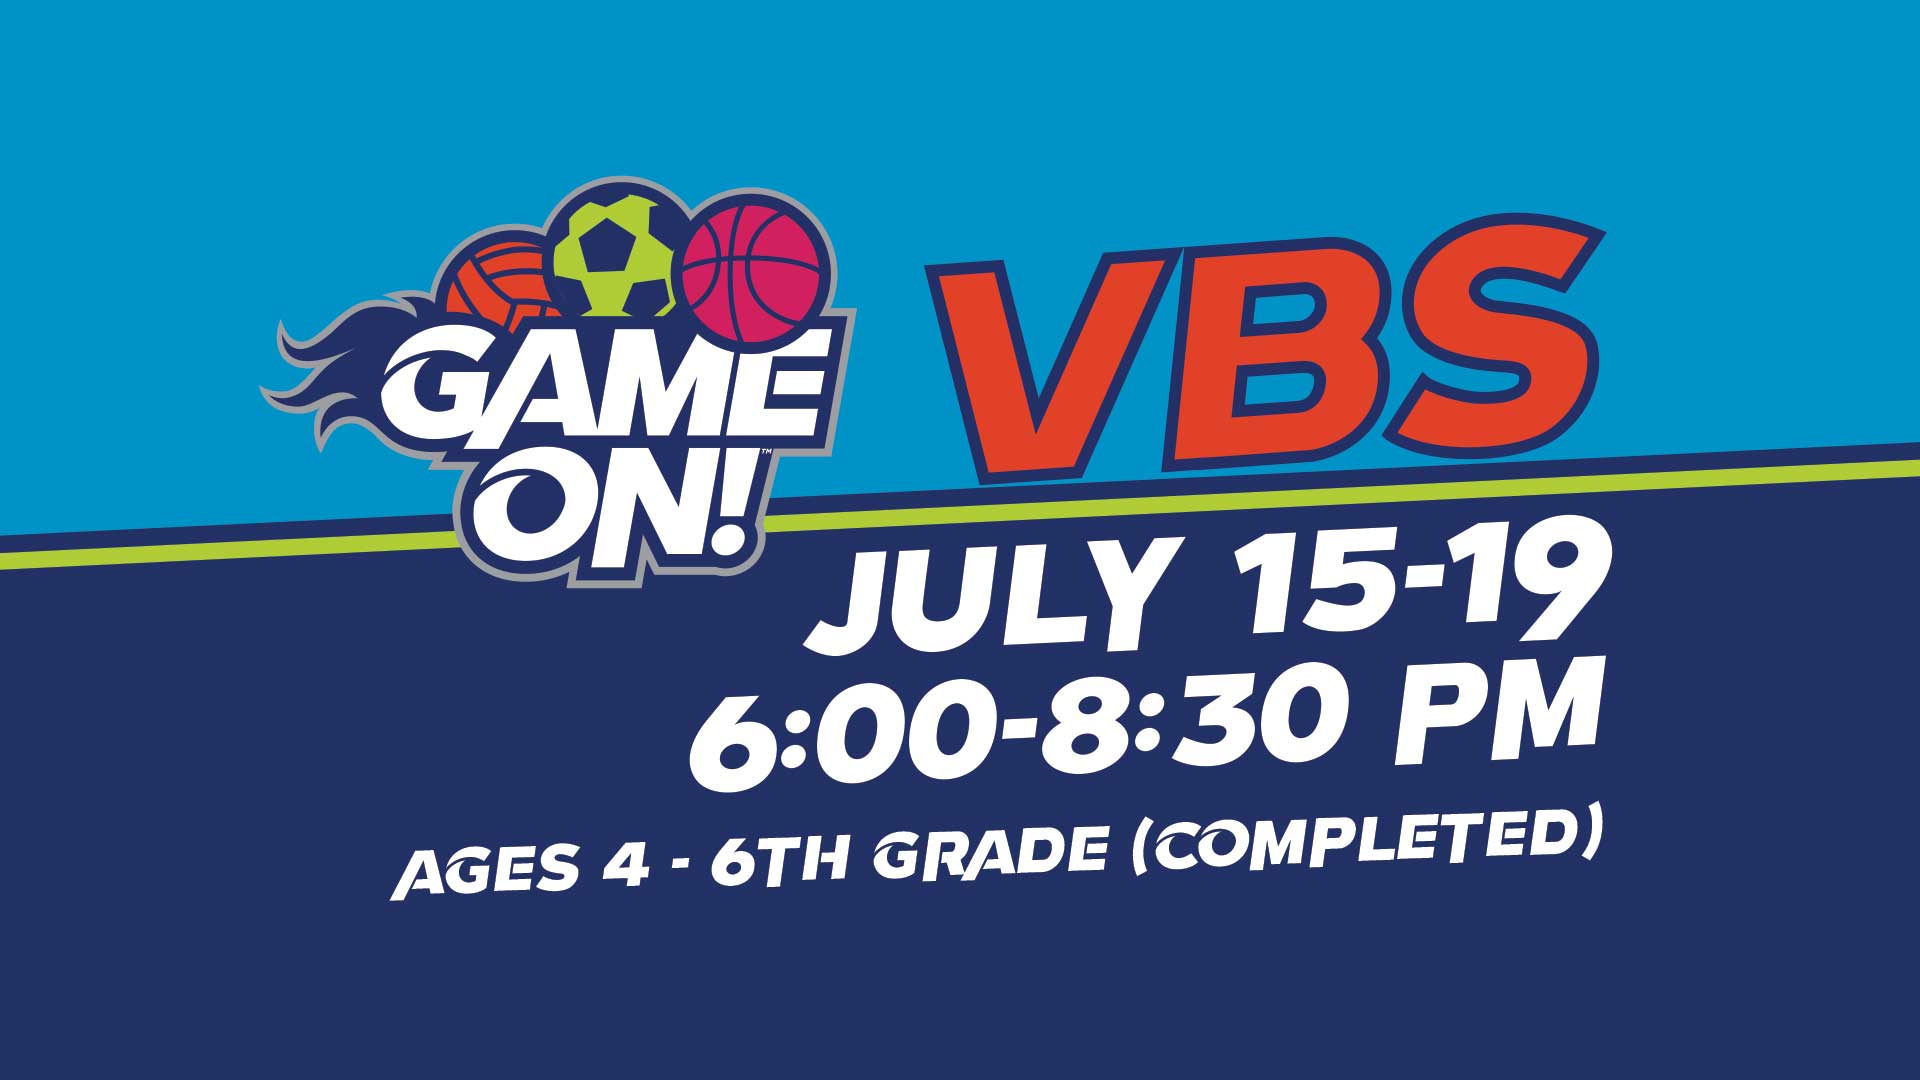 VBS 2018 – GAME ON